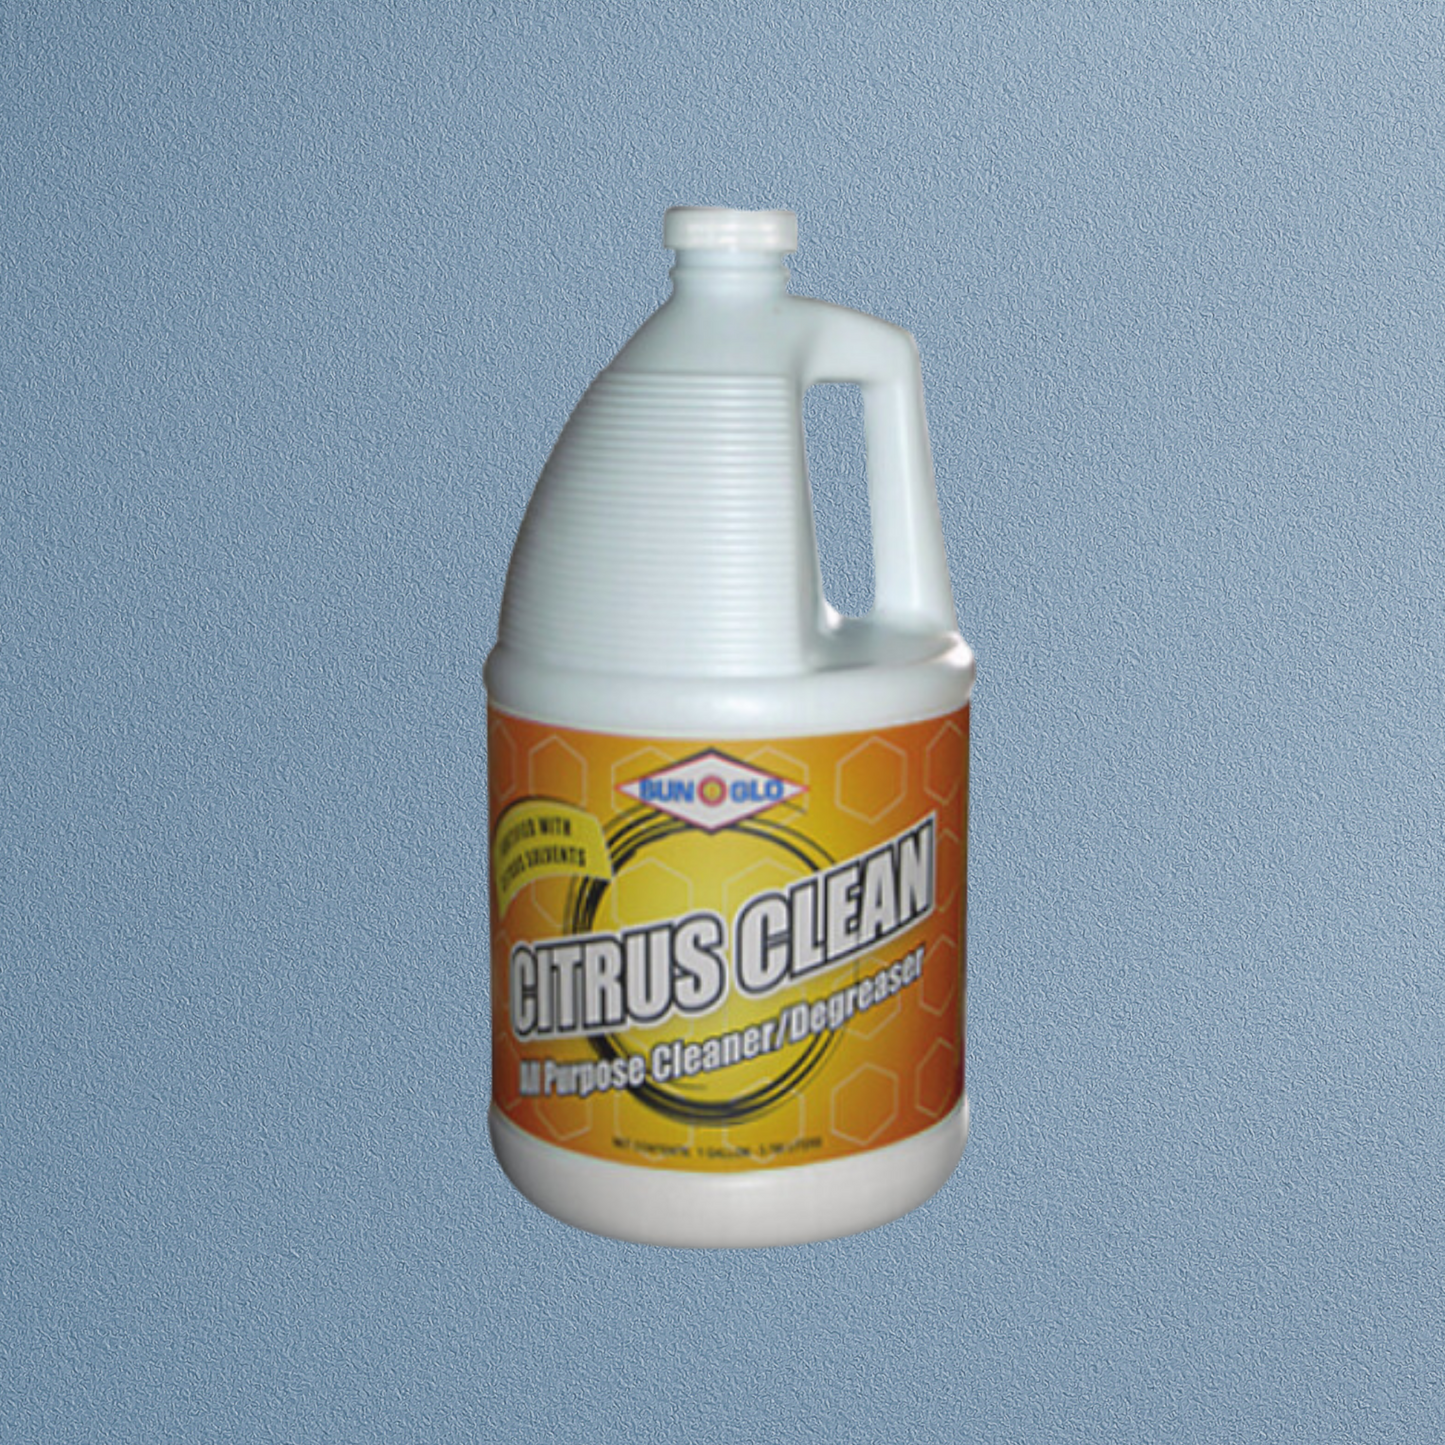 SUN-GLO Citrus Clean - Heavy Duty Degreaser and All-Purpose Cleaner (4x1 Gallon Case)